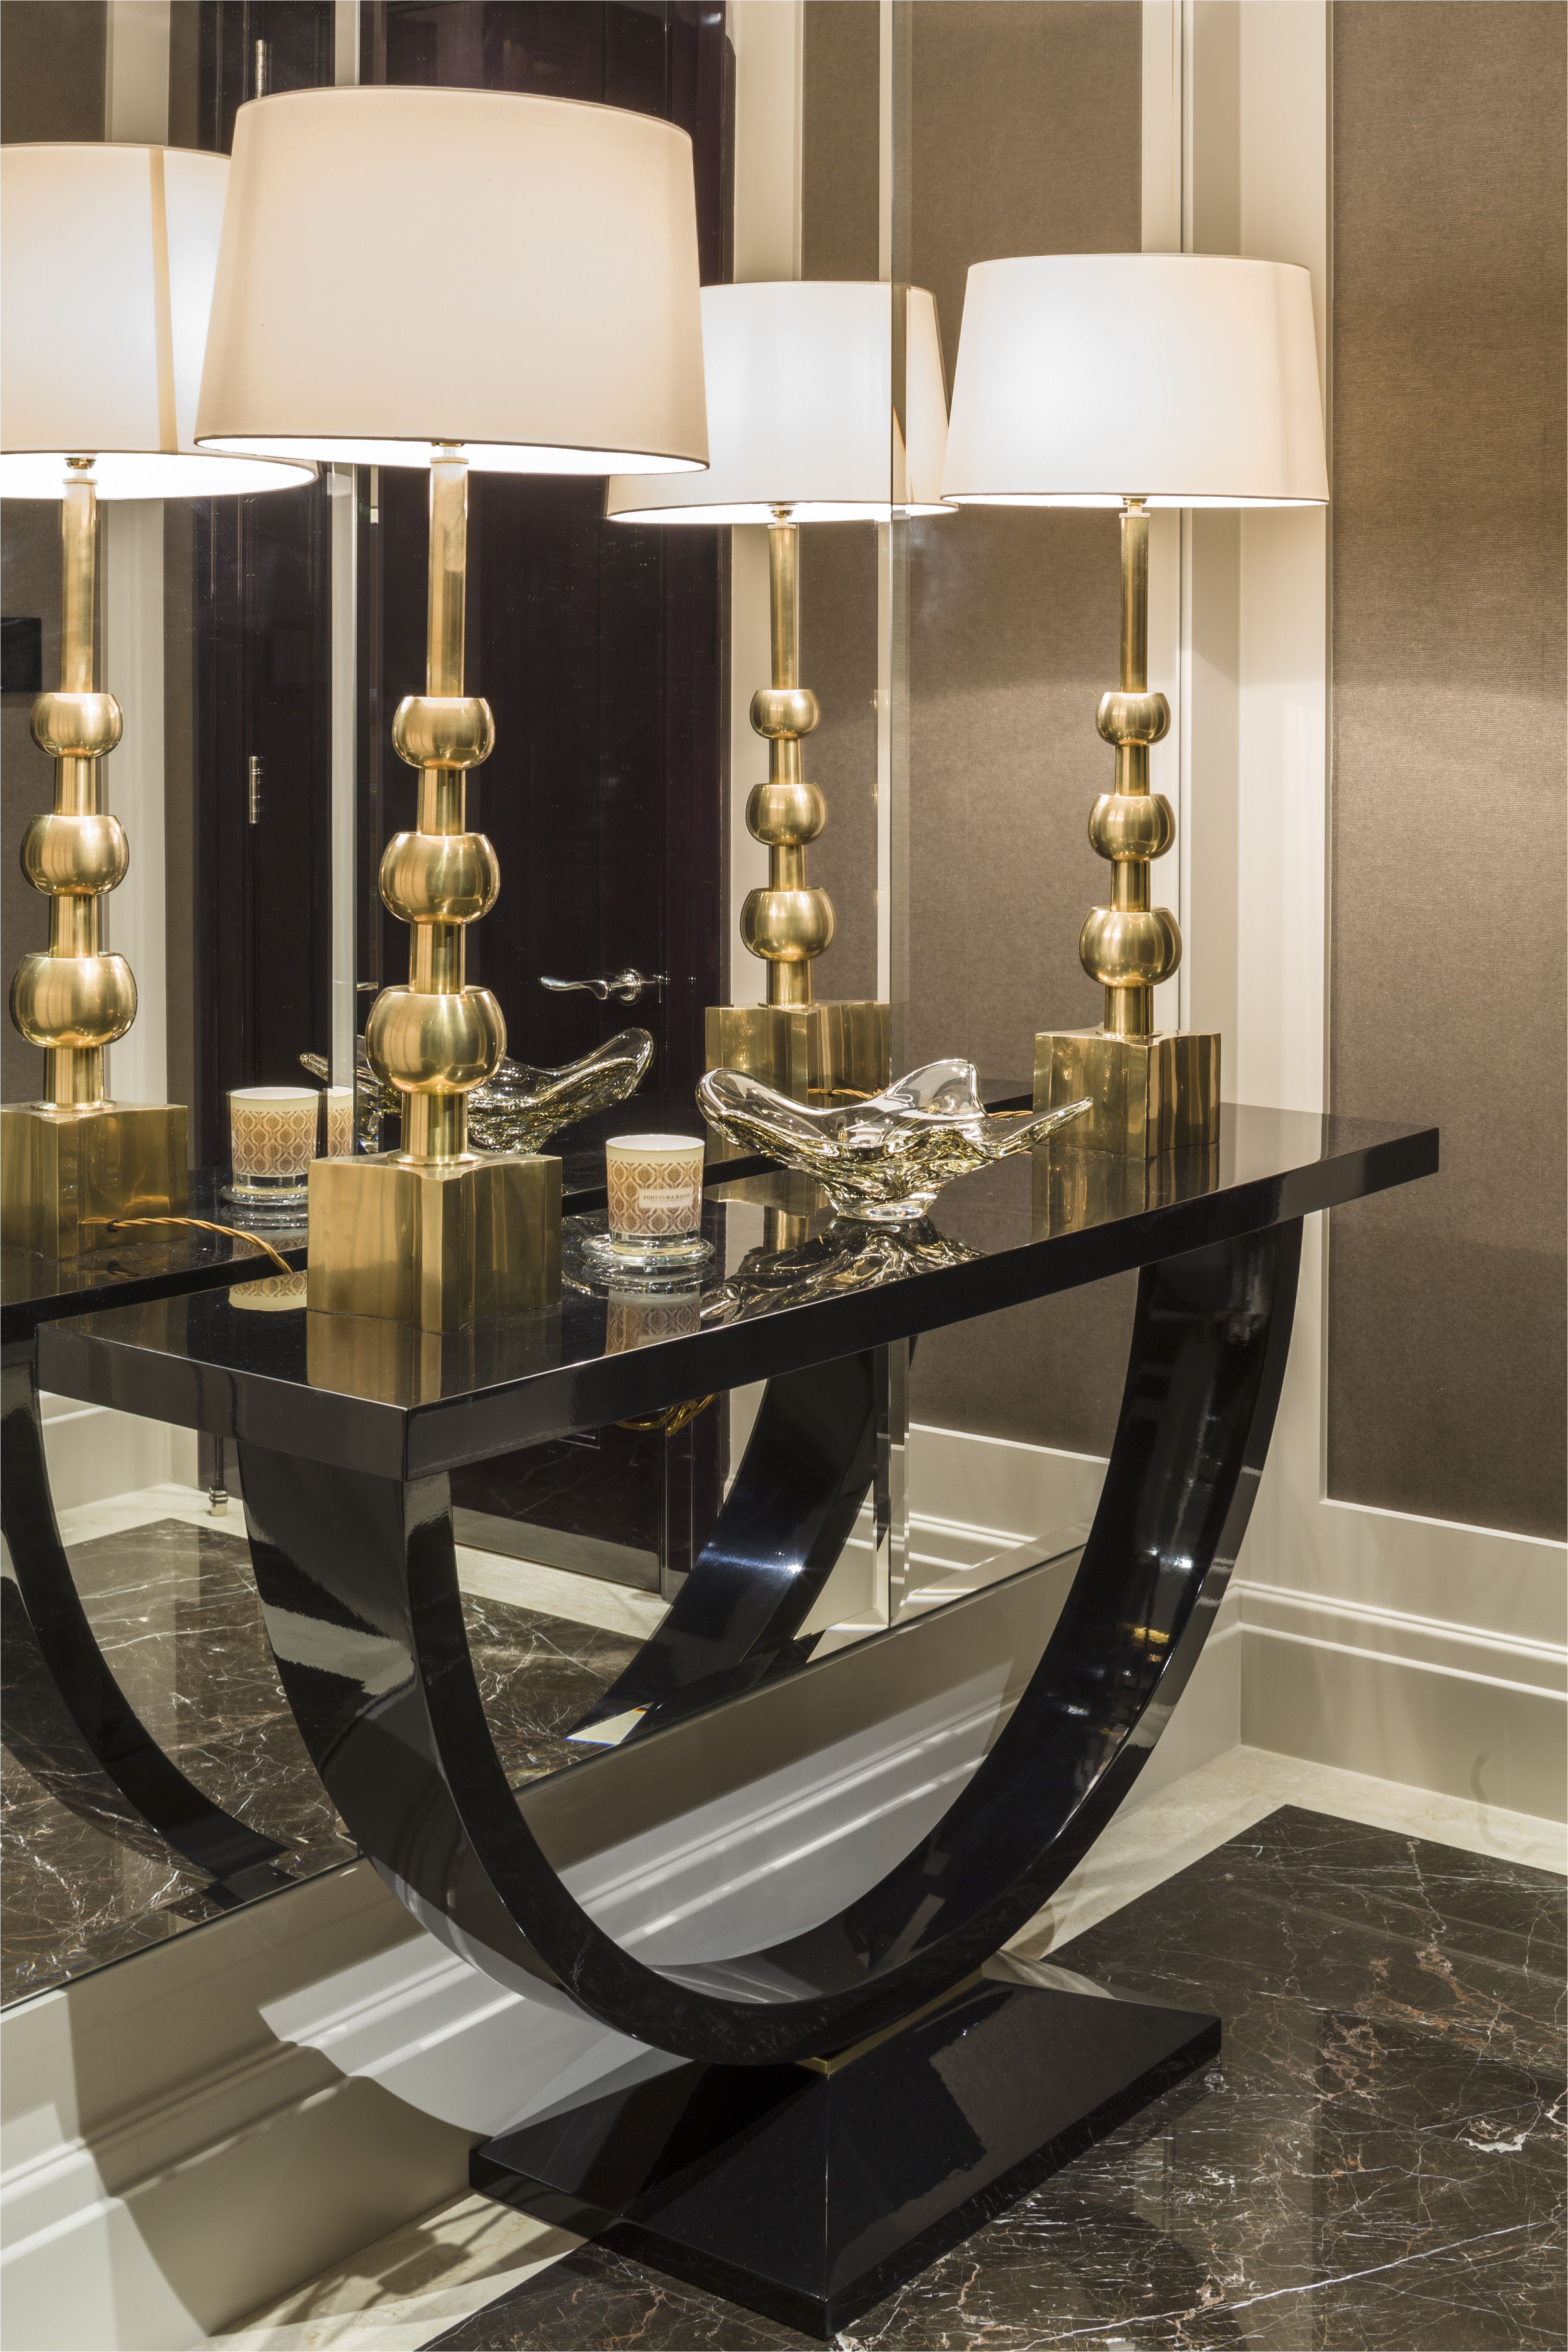 private apartment belgravia the entrance lobby features a console table and two brass based hardwick lamps with white shades from vaughan